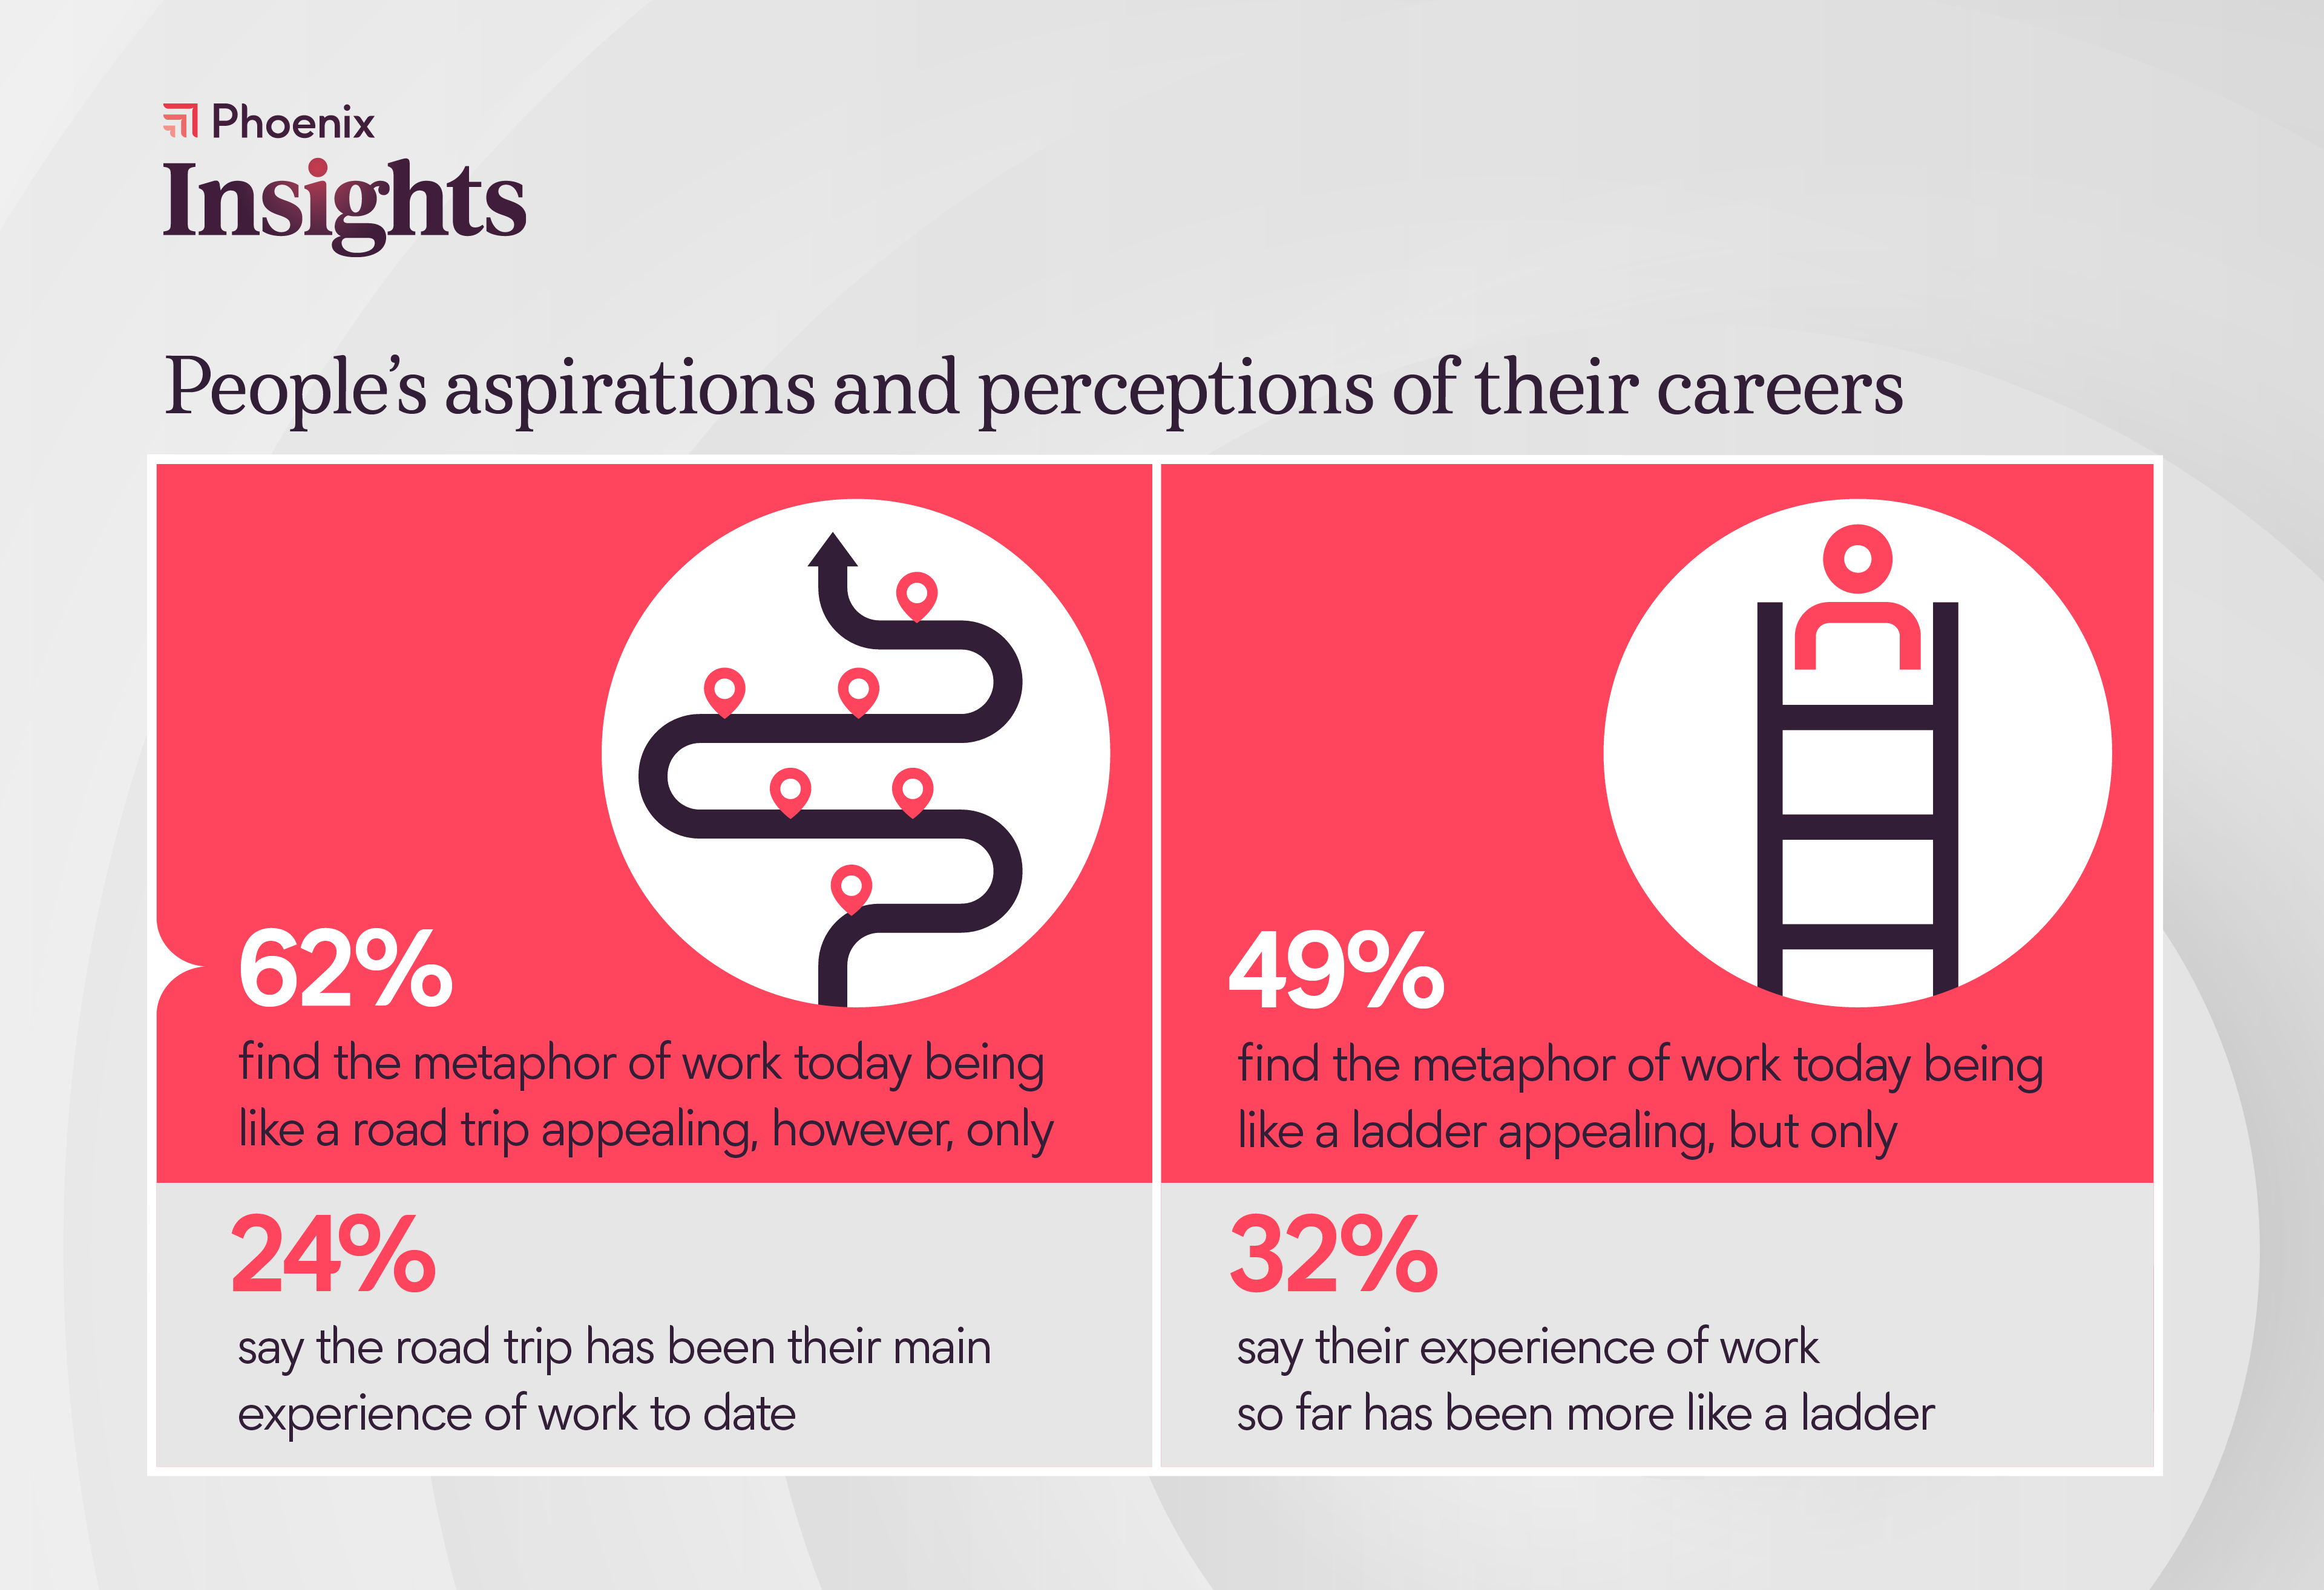 62% of people find the metaphor of work today being like a road trip appealing, however only 24% say the road trip has been their main experience of work to date. 49% find the metaphor of work today being like a ladder appealing, but only 32% say their experience of work so far has been more like a ladder.